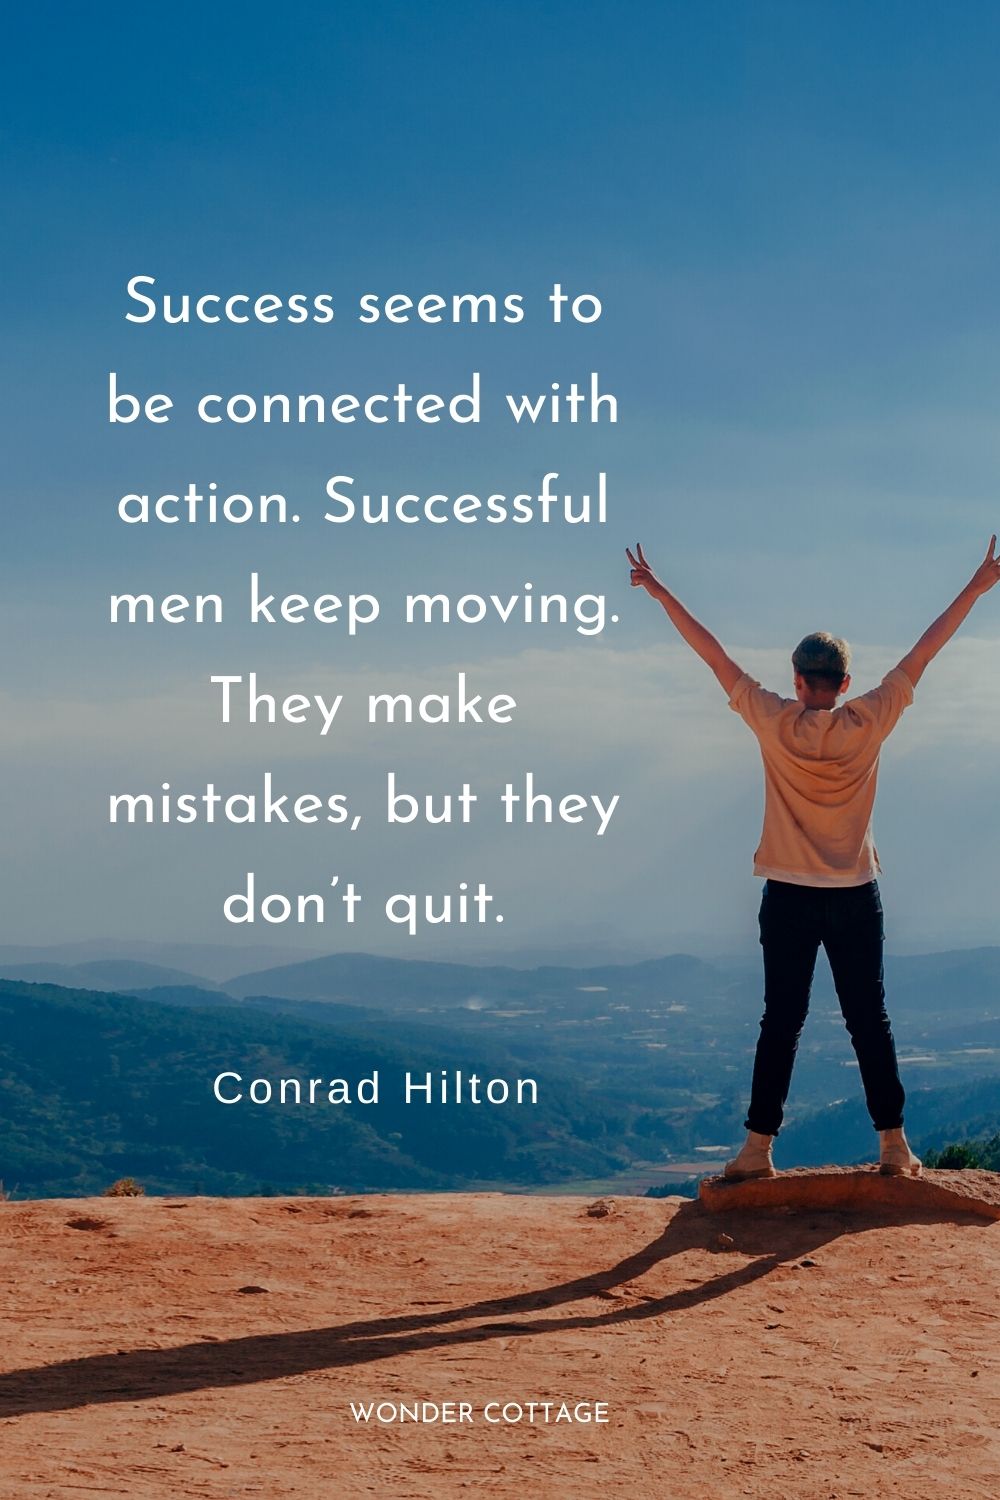 Success seems to be connected with action. Successful men keep moving. They make mistakes, but they don’t quit.  Conrad Hilton